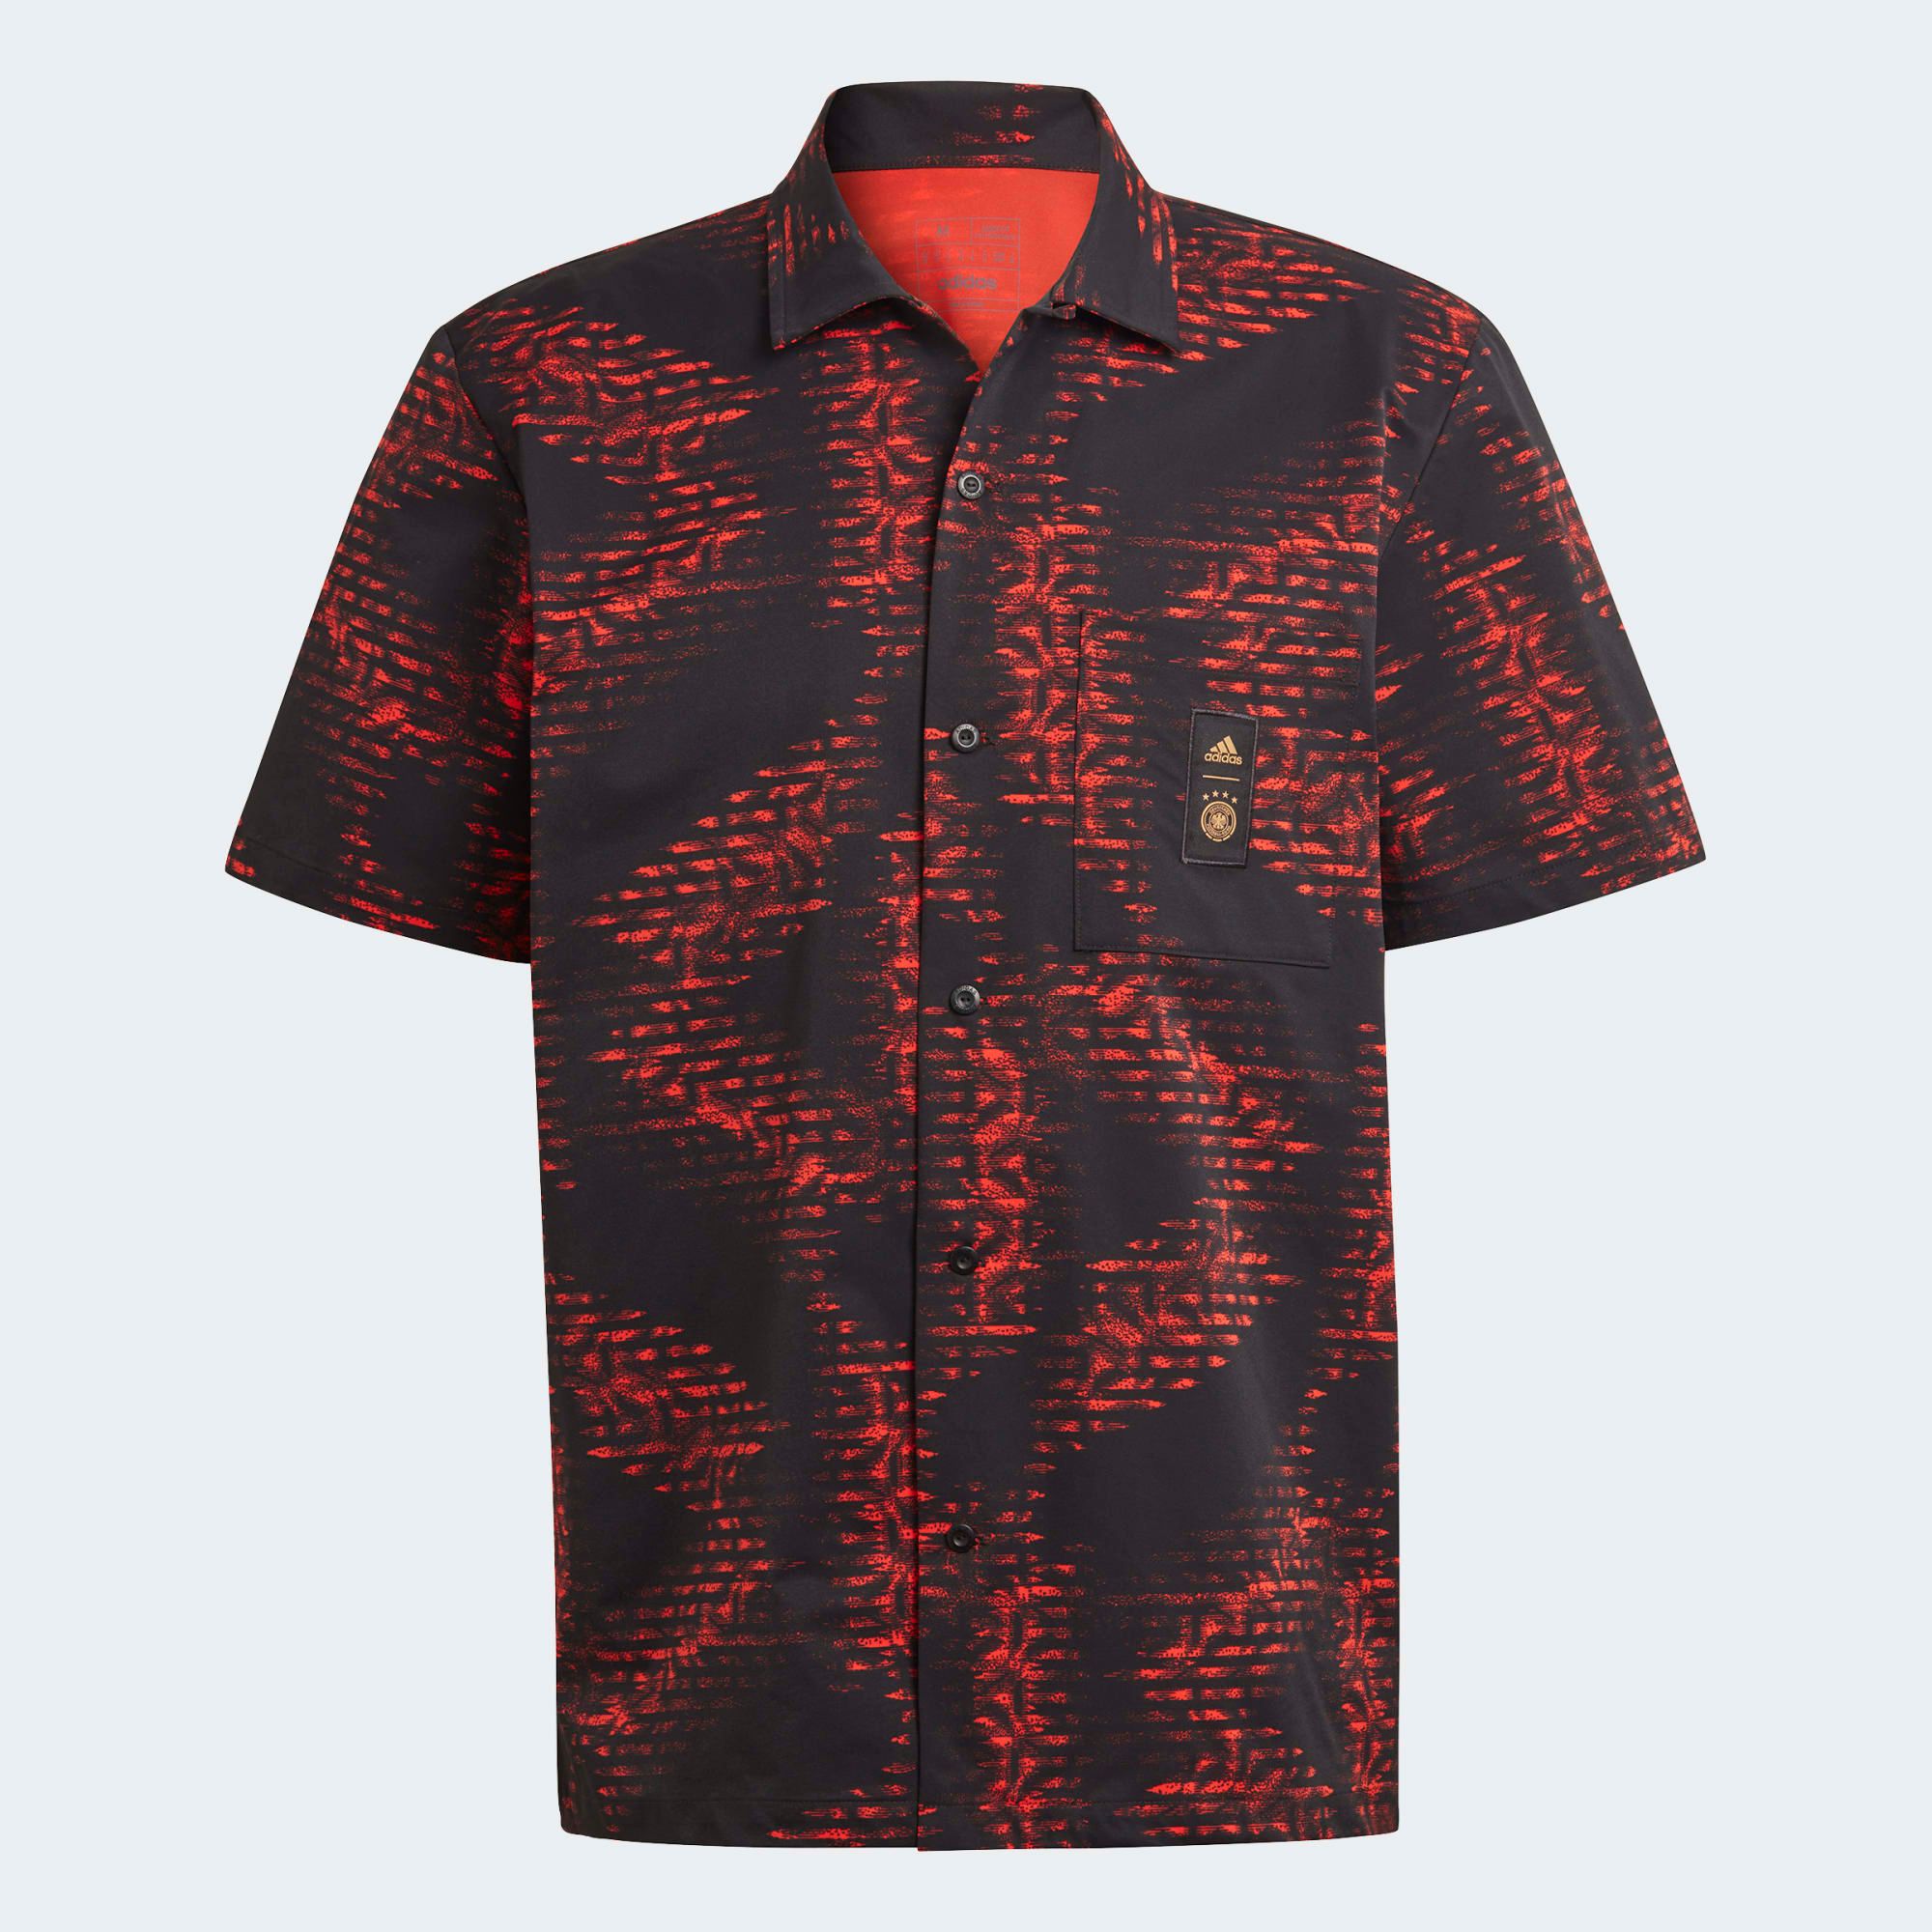  adidas Germany Icon Twill Shirt (World Cup 2022 Official Merchandise) - Black/Red 